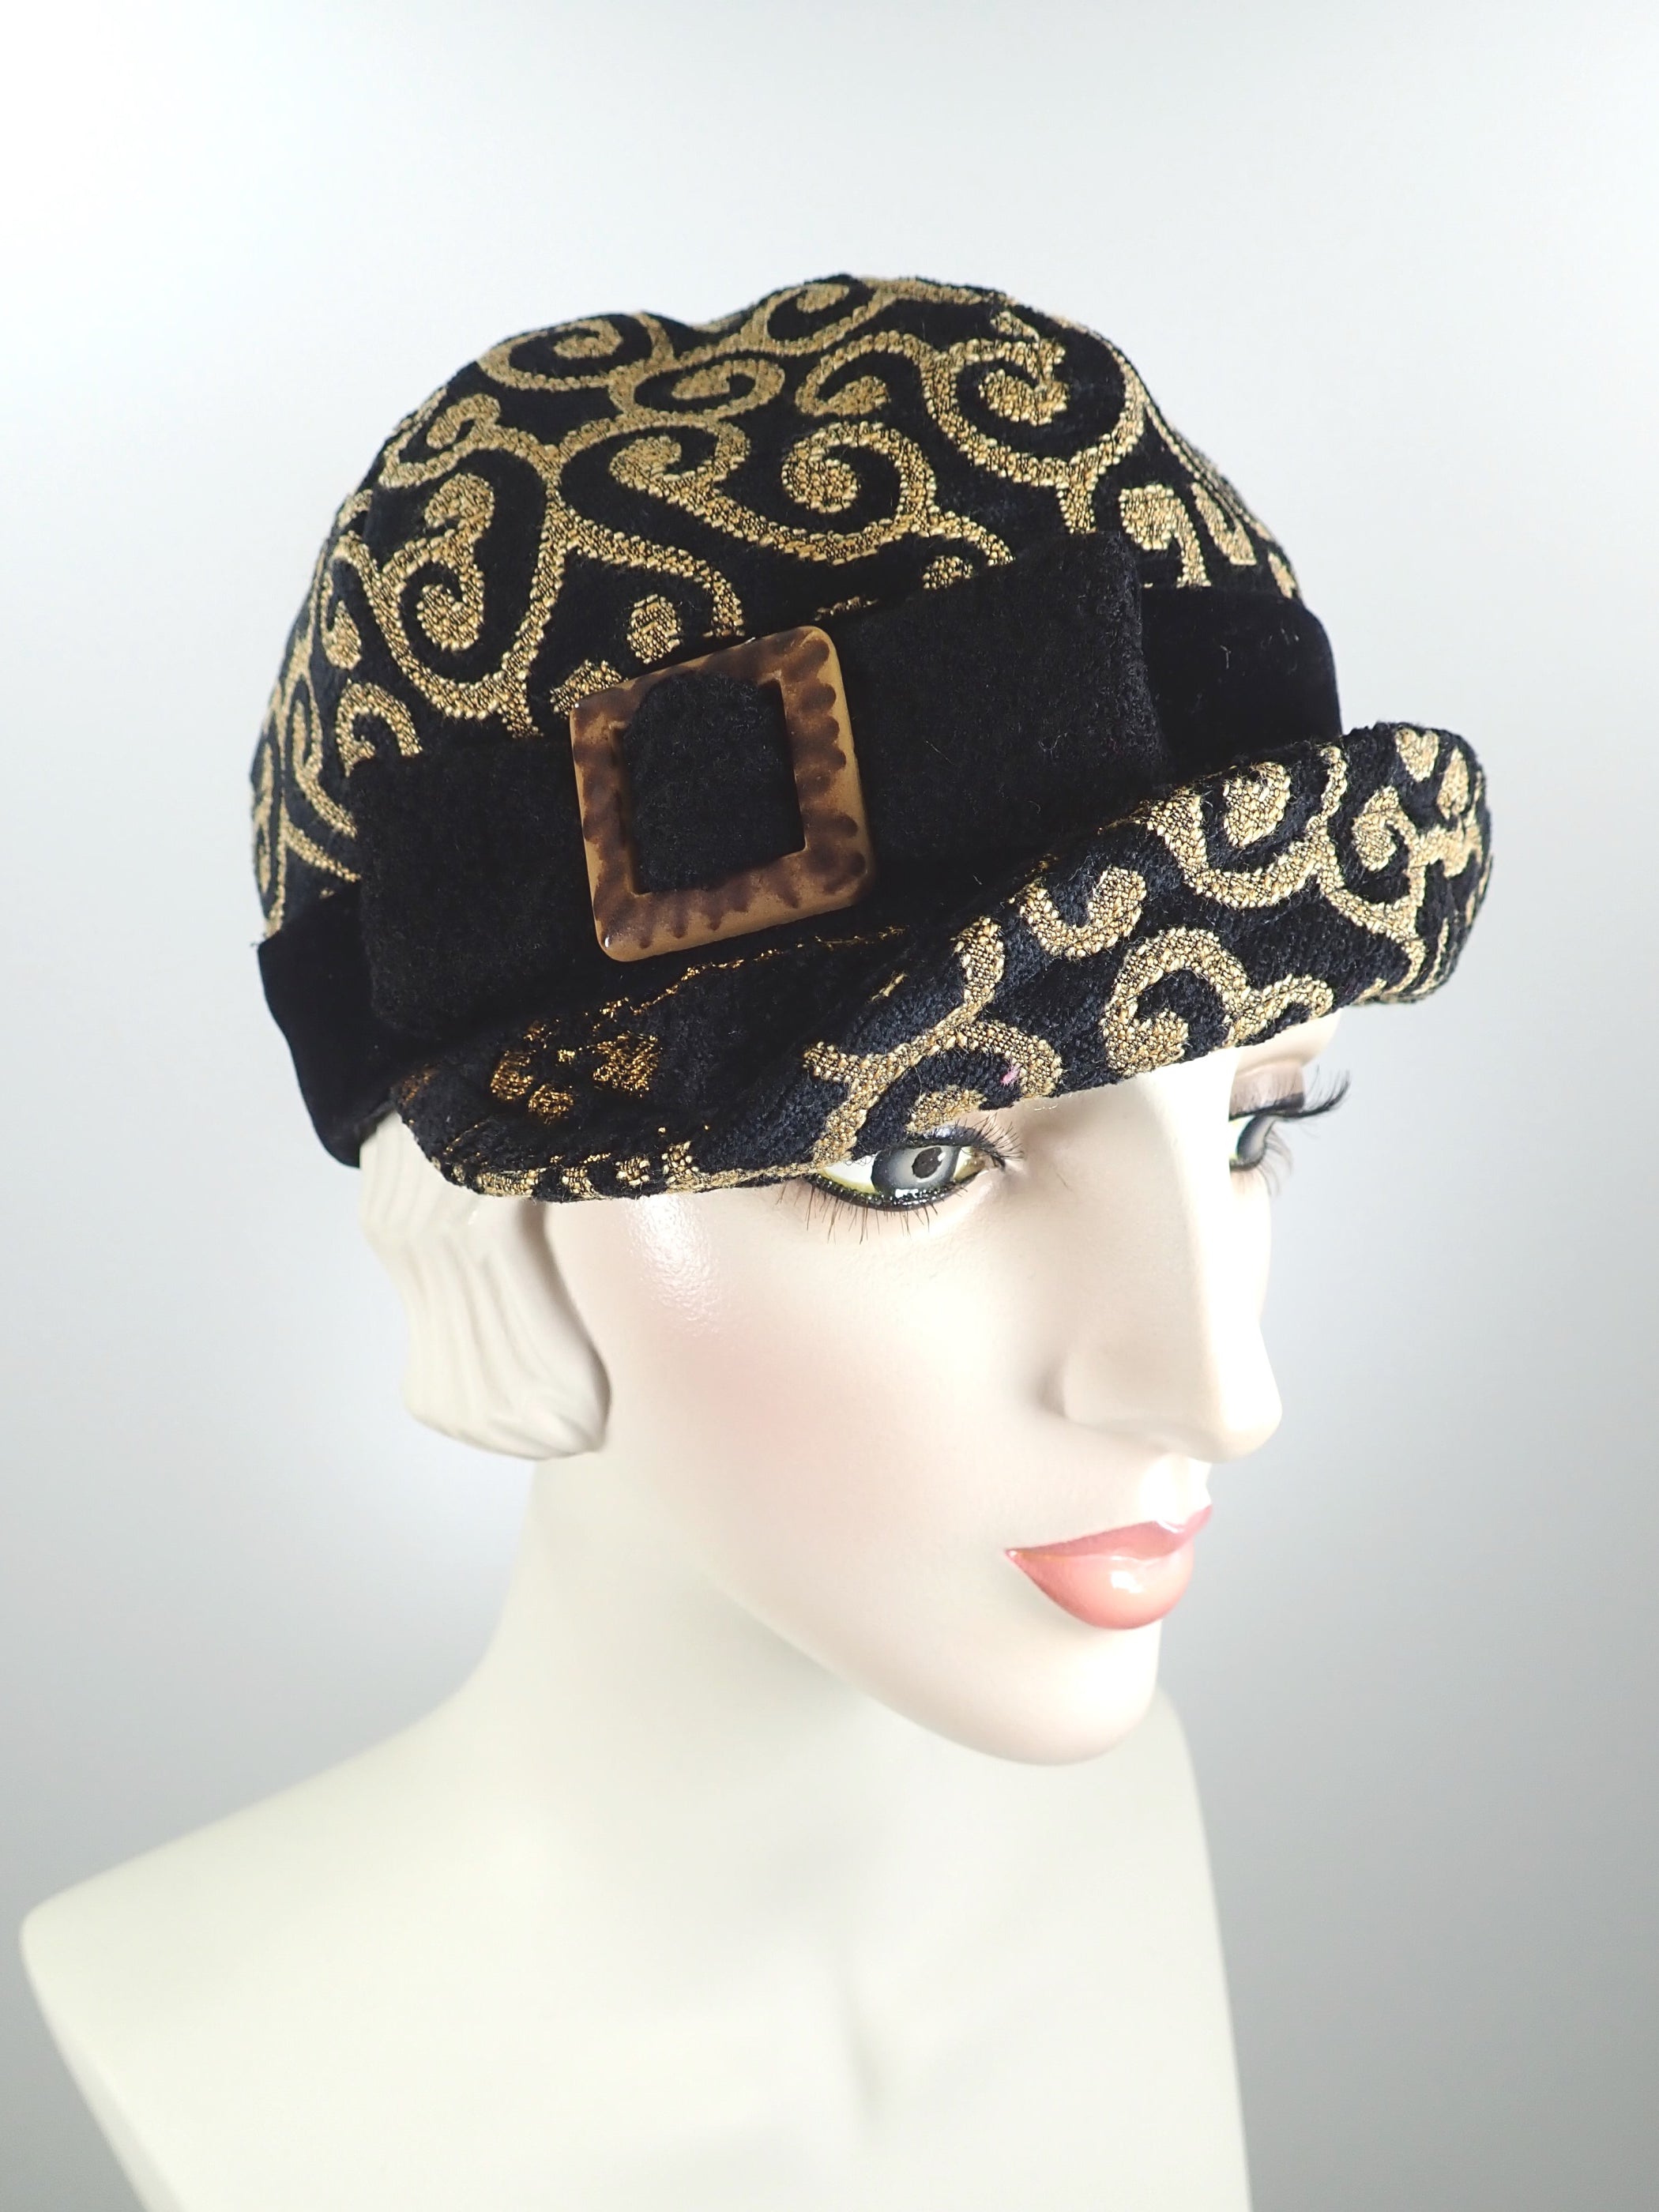 Women's Fall and Winter Cotton Velveteen Hat in Gold and Black - Baseball Style Newsboy Cap